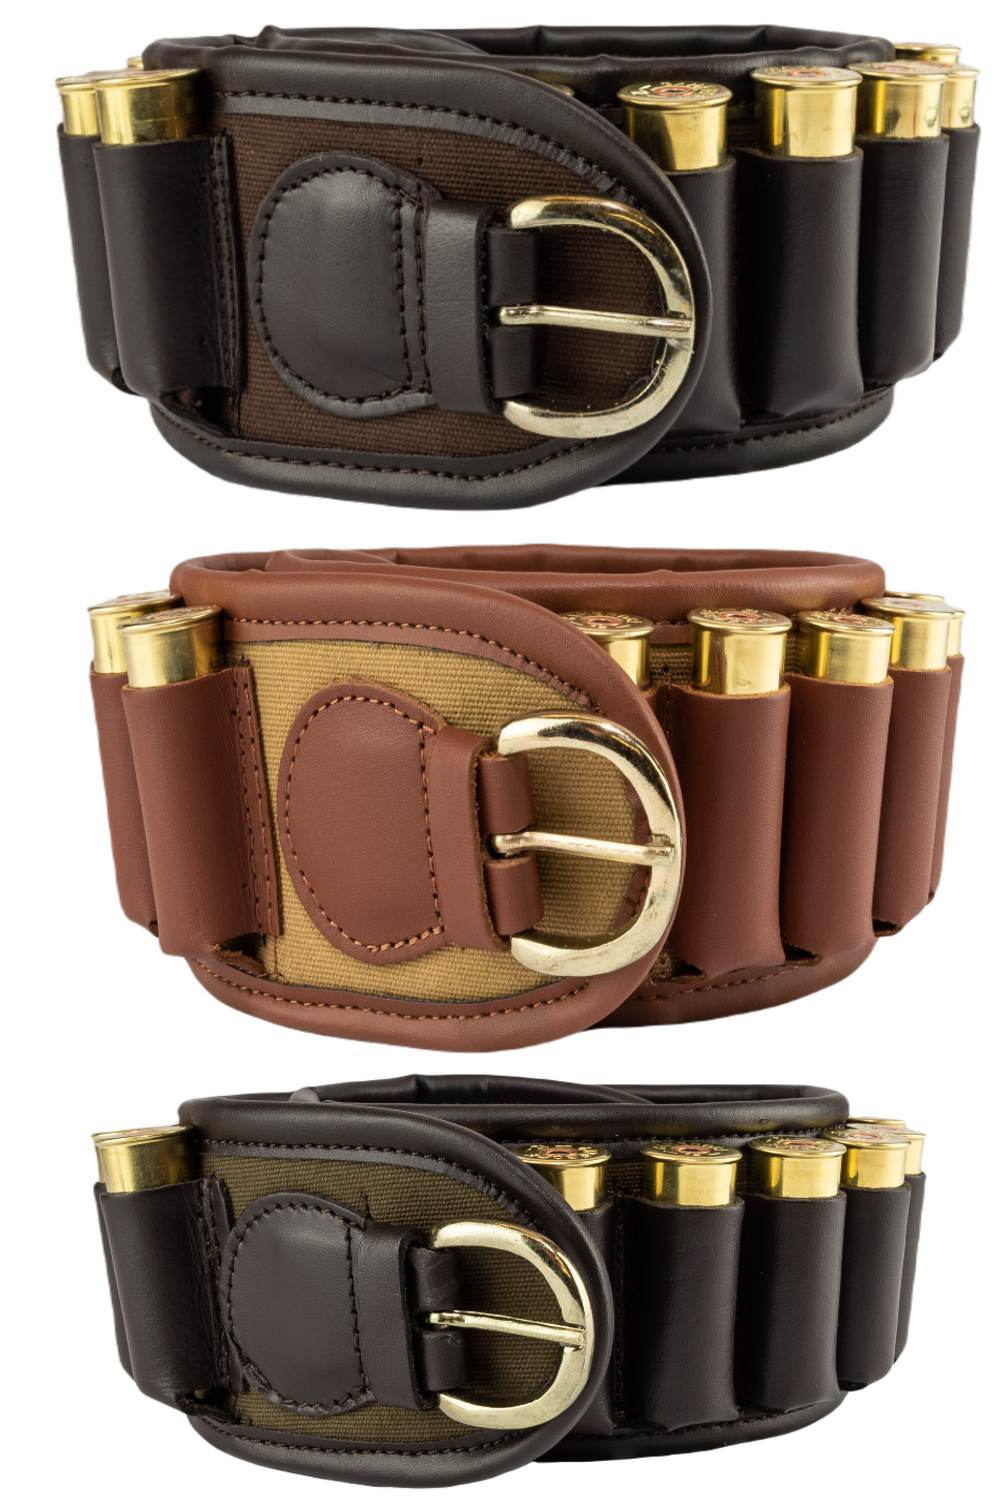 Jack Pyke Canvas Cartridge Belt in Brown, Fawn and Green 